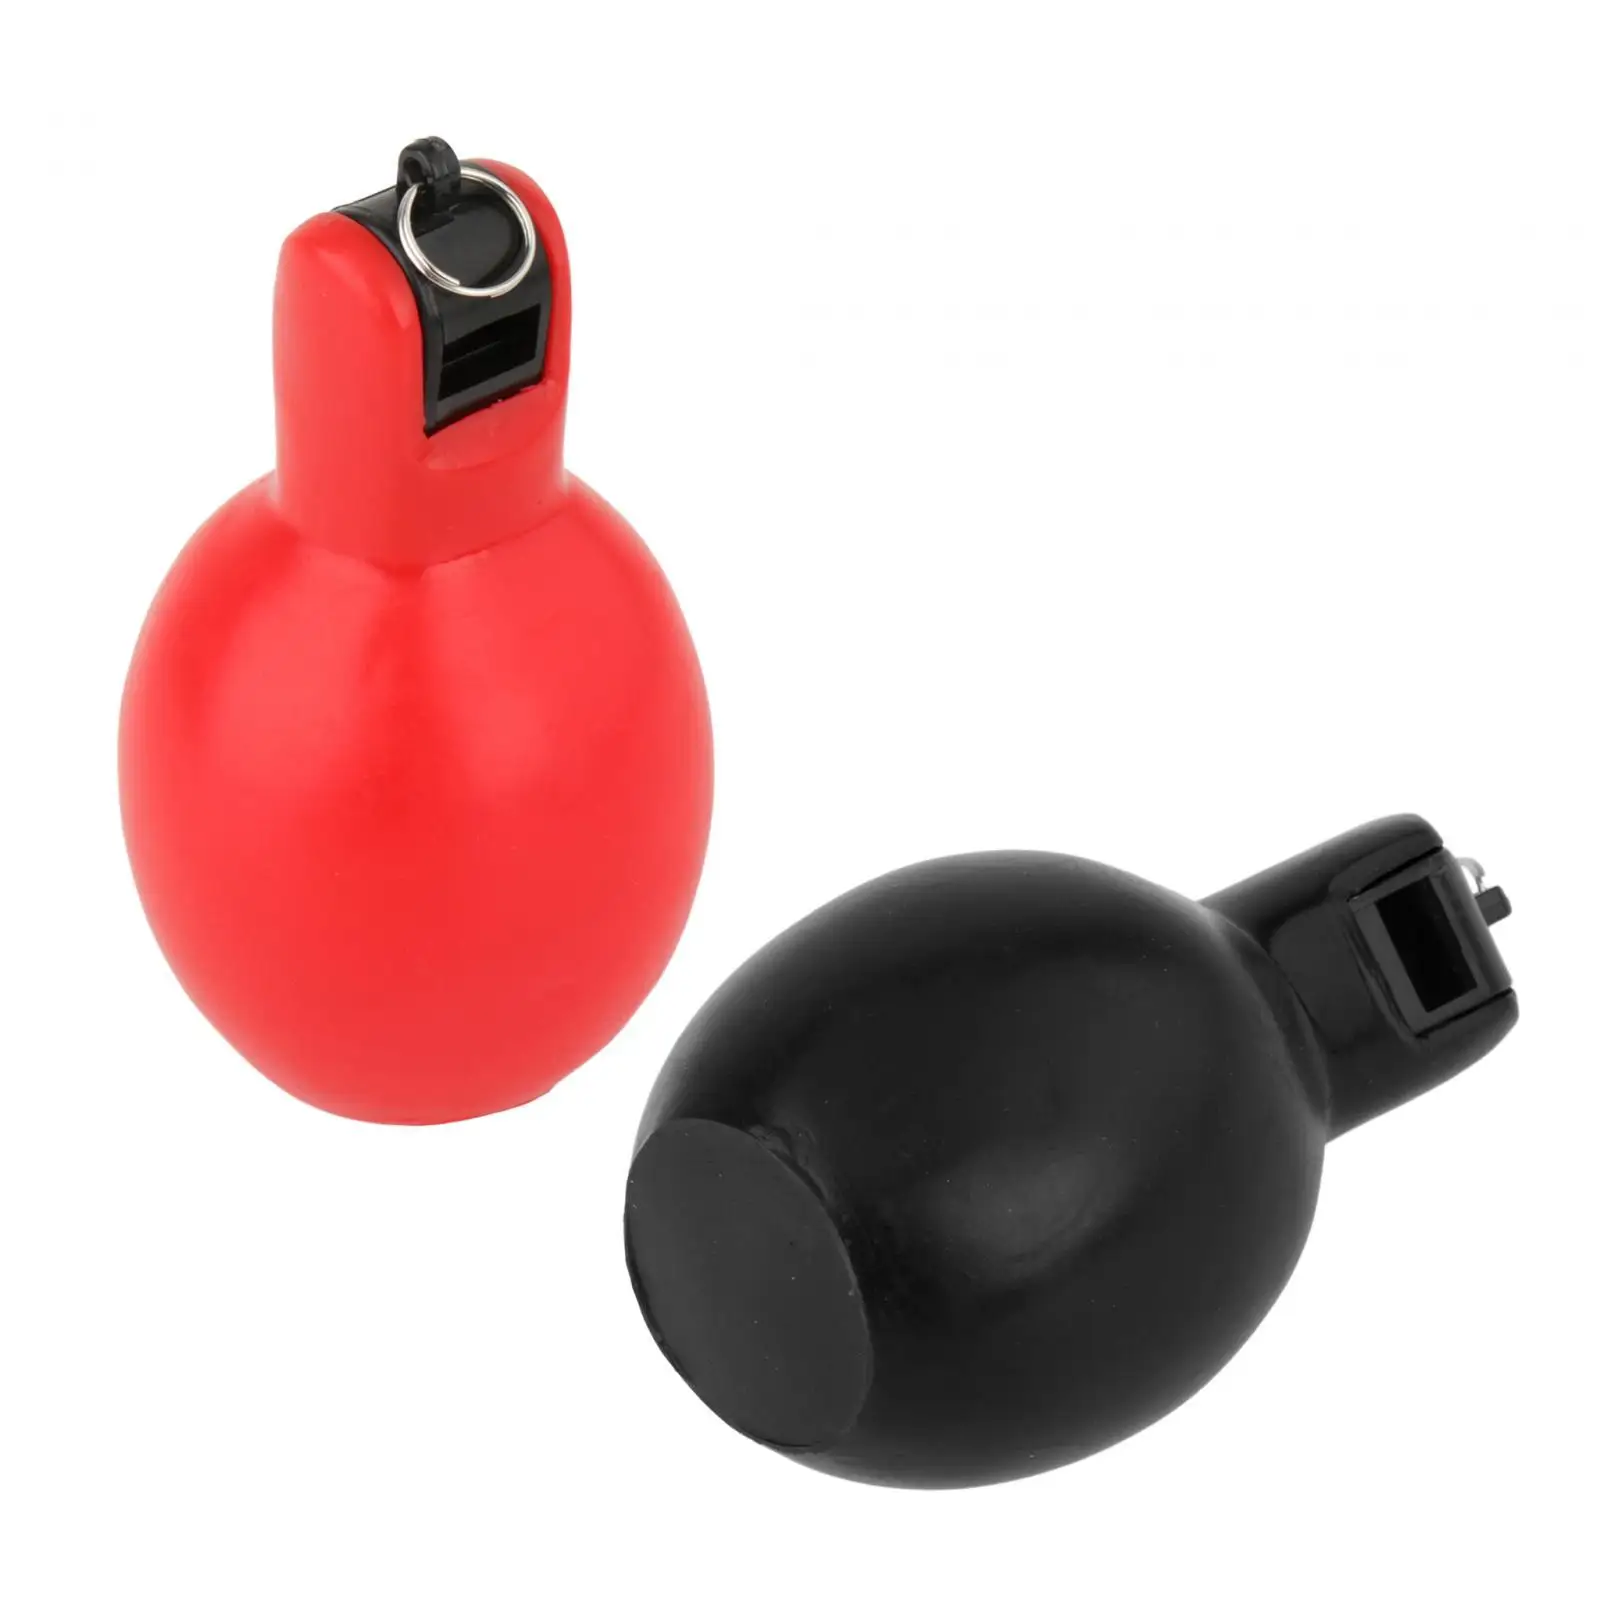 Hand Squeeze Whistles, 2 Pack Coaches Whistle for Coaches Referees, Handheld